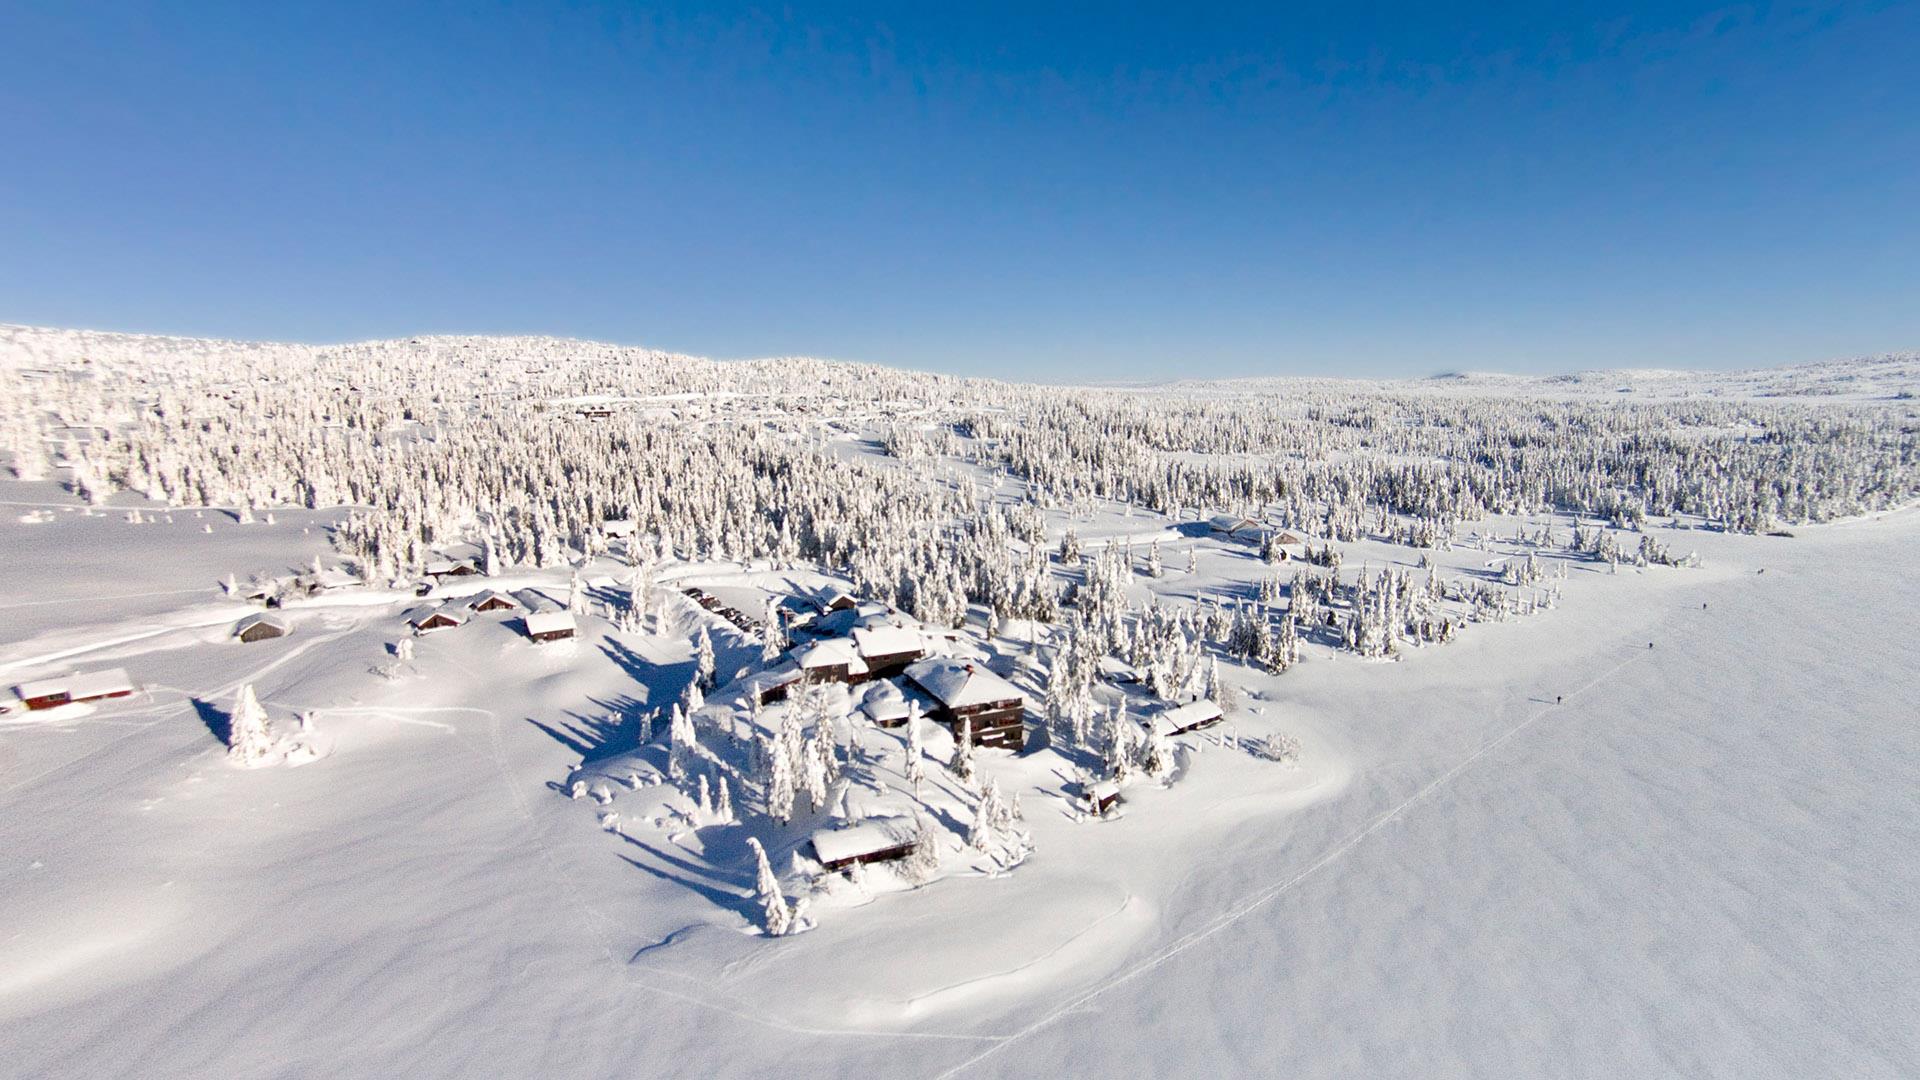 Rustad hotel and mountain cabins - Drone photo winter